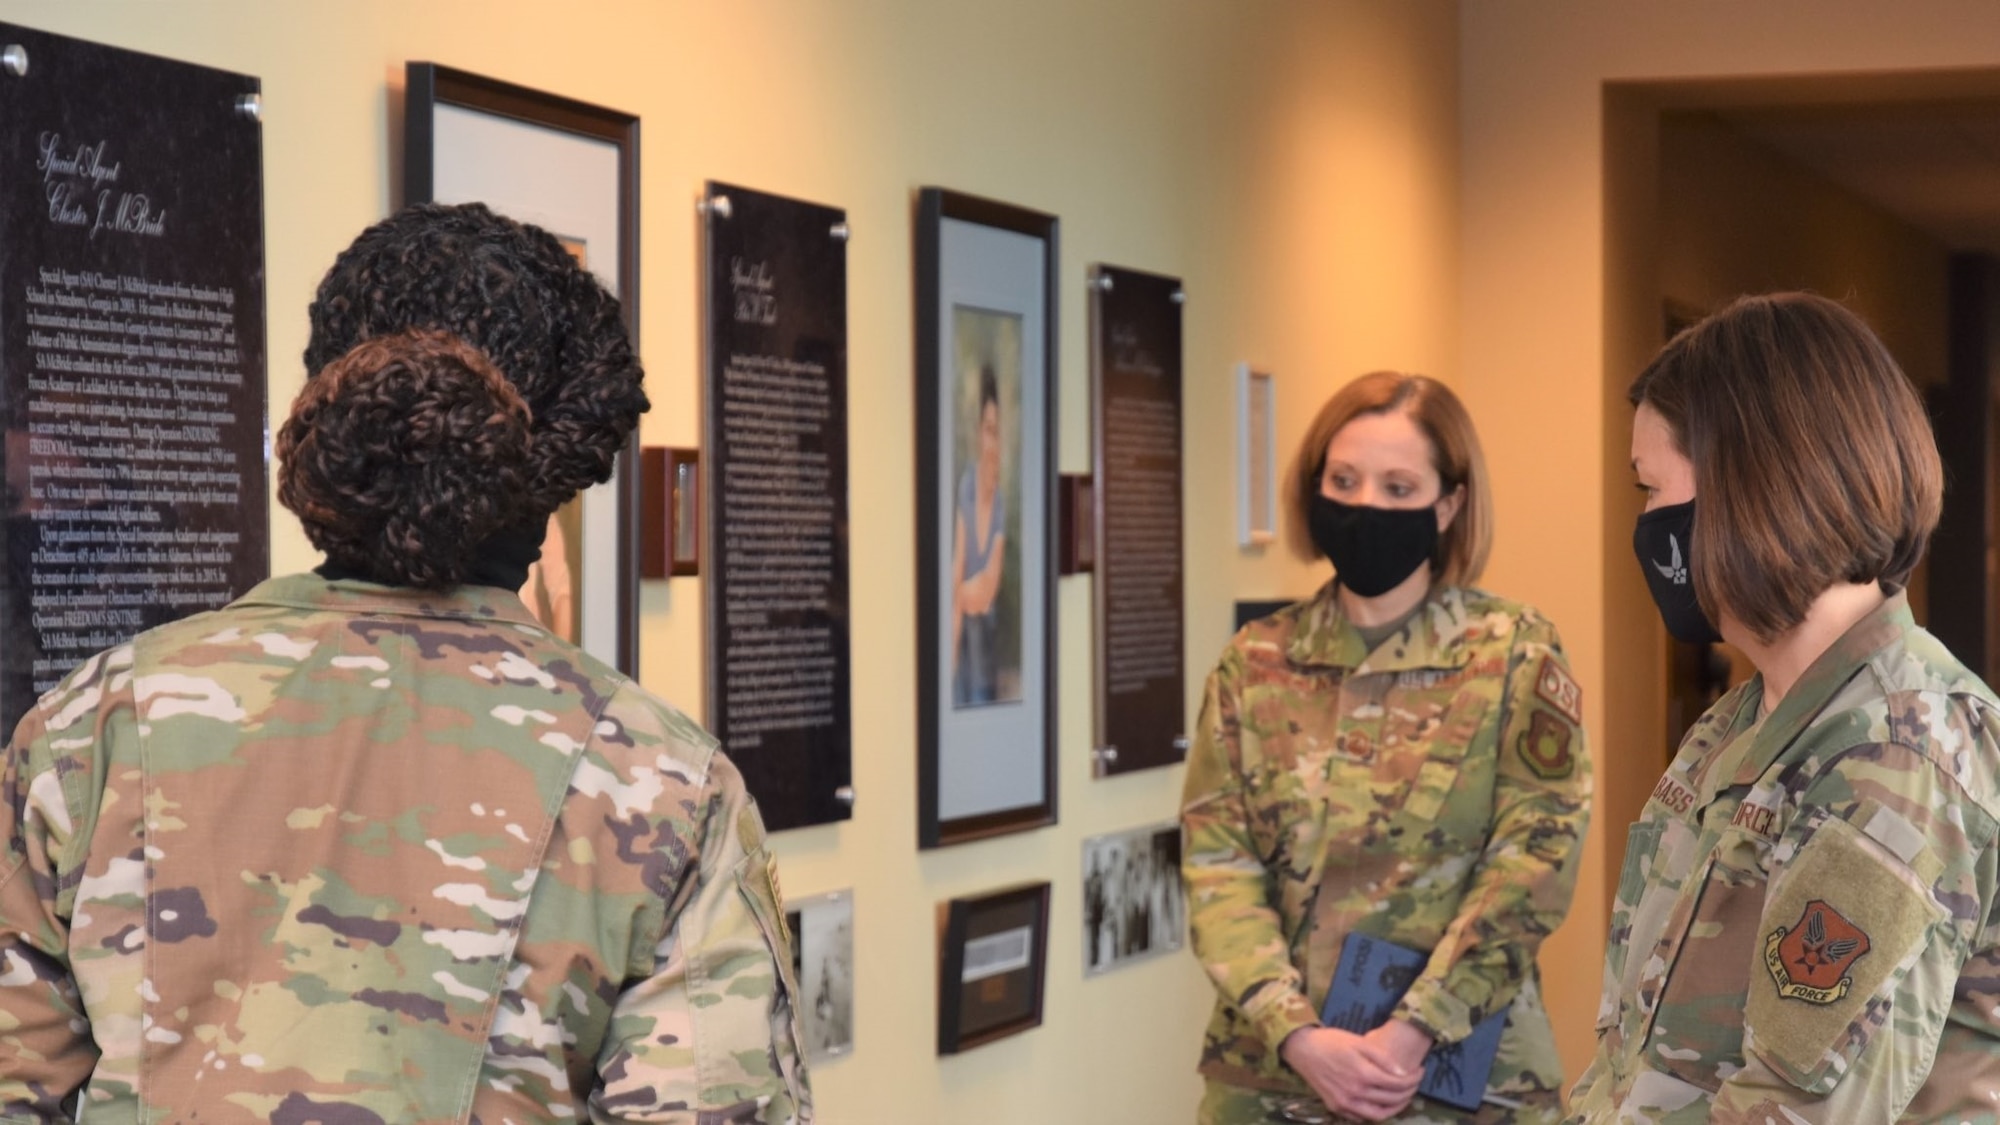 Chief Master Sergeant of the Air Force JoAnne S. Bass, right, tours the Office of Special Investigations Hall of Heroes during her inaugural visit as CMSAF to OSI Headquarters, Quantico, Va., March 12. Guiding the Hall tour is Tech. Sgt. Trakeila Holt, left, and OSI Command Chief Master Sgt. Karen Beirne-Flint. (Photo by SA Spencer King)